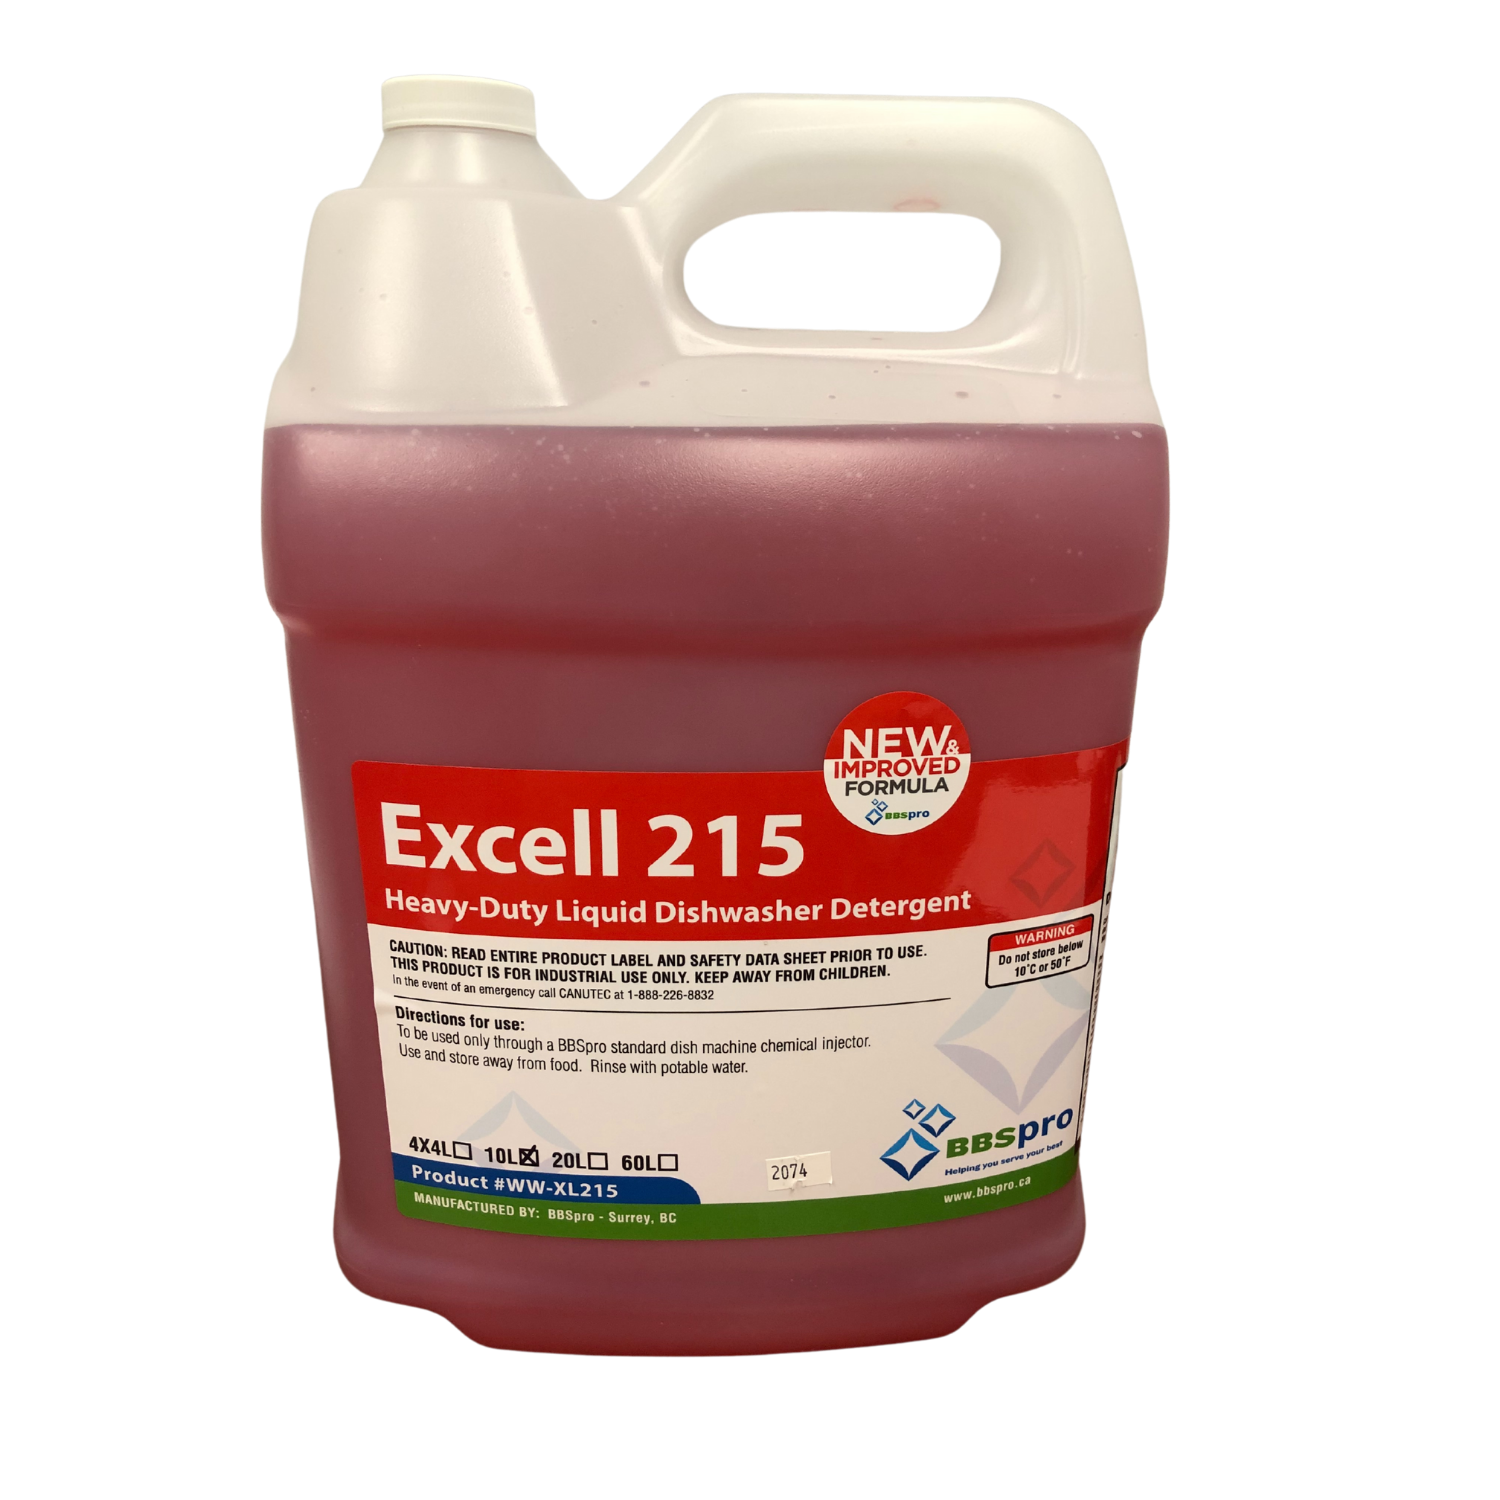 Excell 215